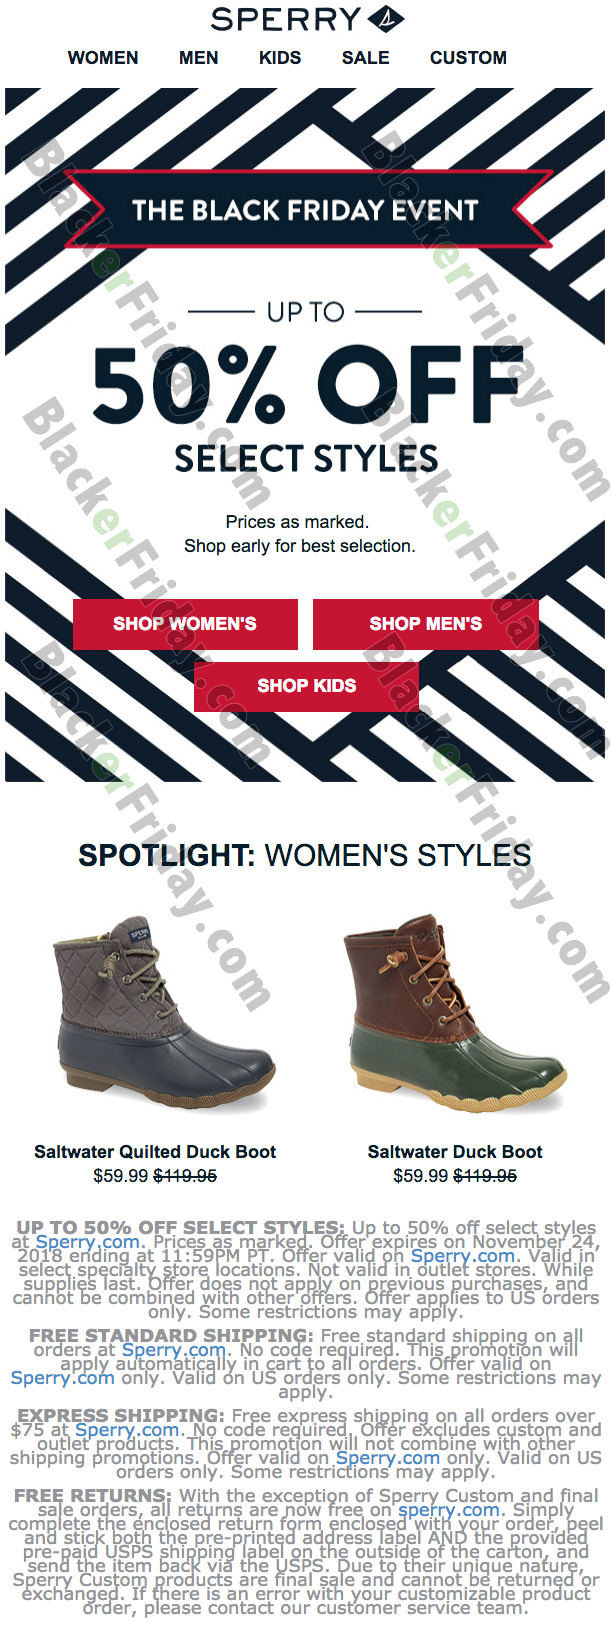 Sperry Black Friday 2021 Sale - What to 